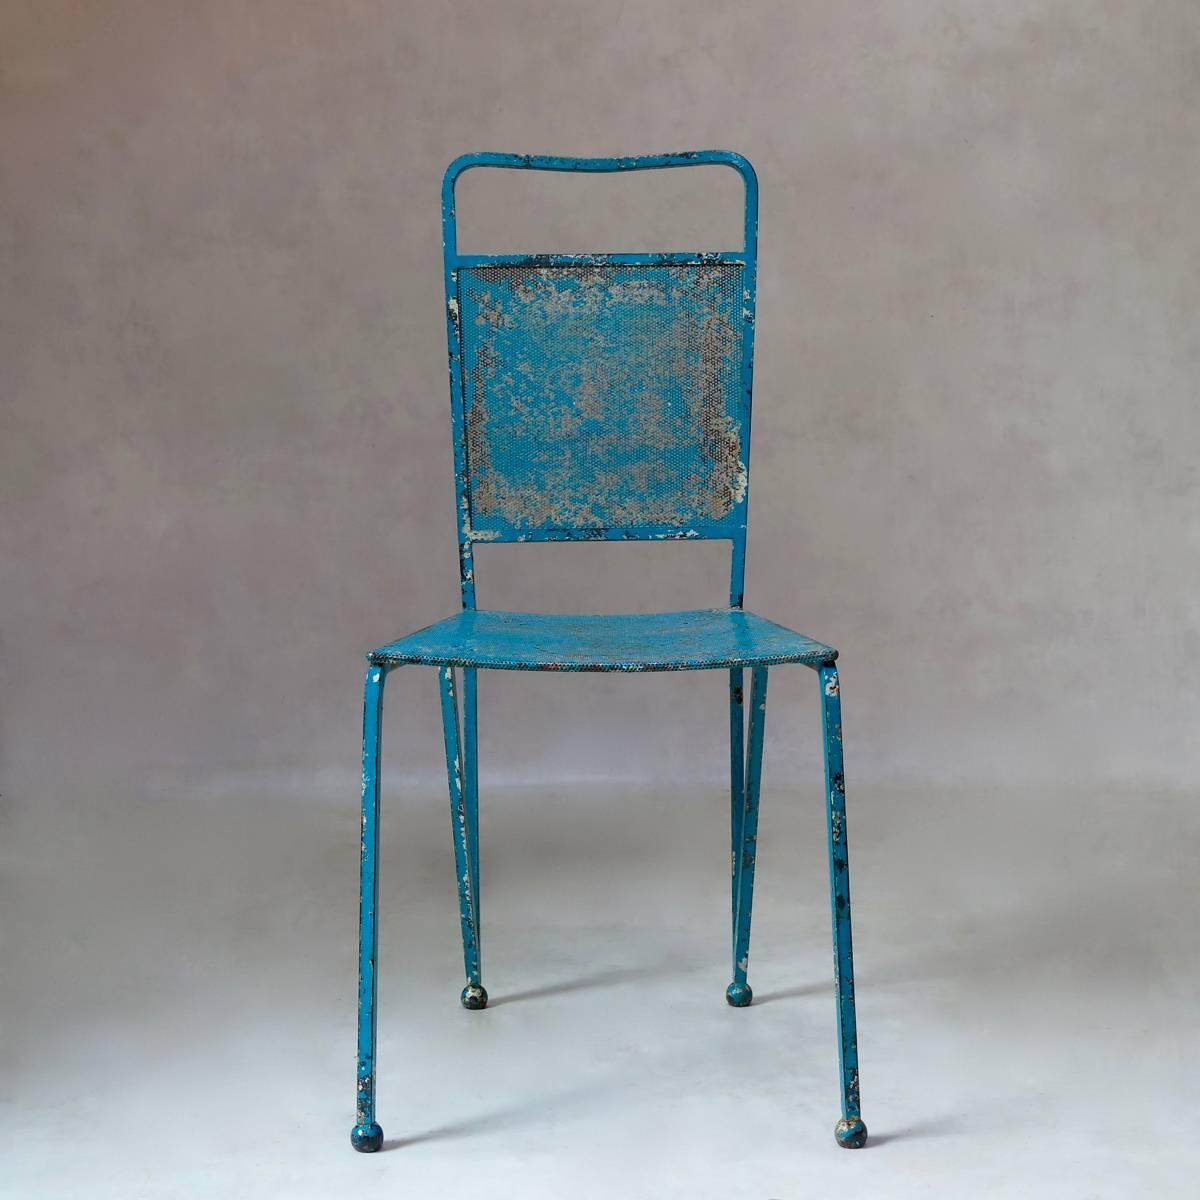 Unique set of 12 iron chairs of beautiful design. The chairs are very heavy, with sturdy, perforated sheet metal seats and backs. The structure of the chairs forms a continuous visual line from one front leg, back and around again to the opposite